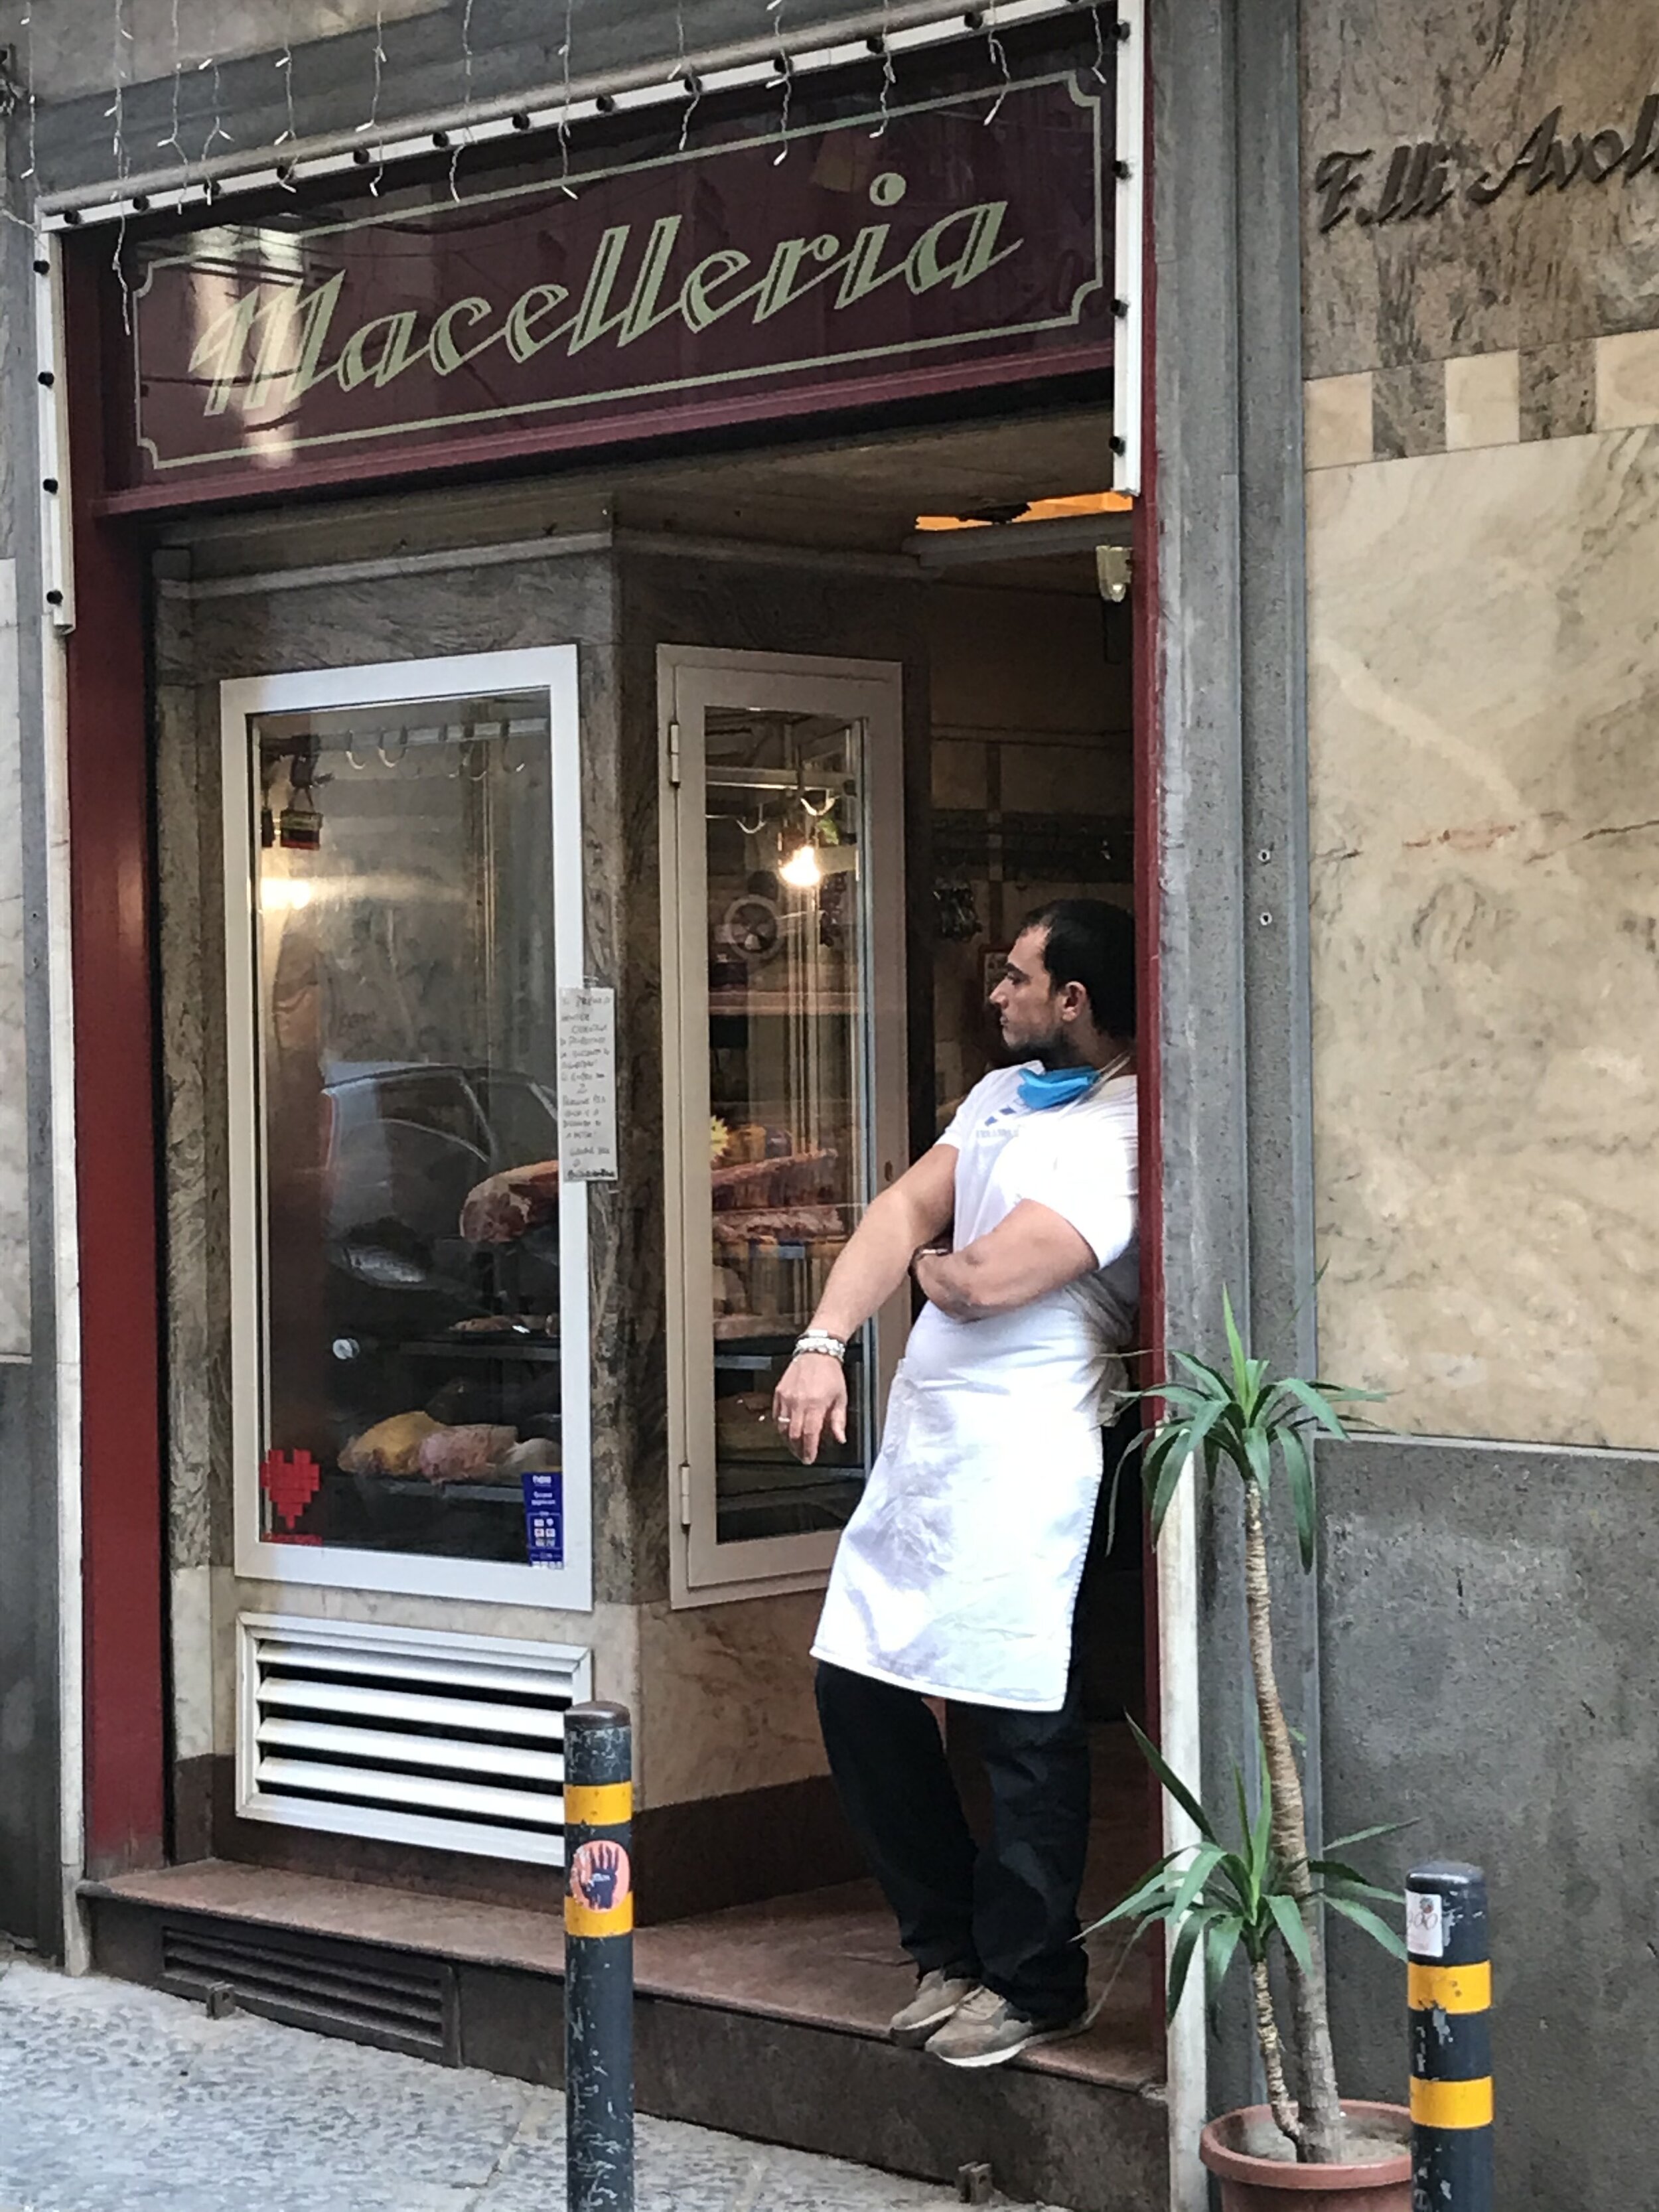   NAPLES, Italy: August 7th, 2020. PICTURED:  A  maceliere,  or butcher, enjoys a cigarette in the early morning after finishing preparations for the day’s work. 